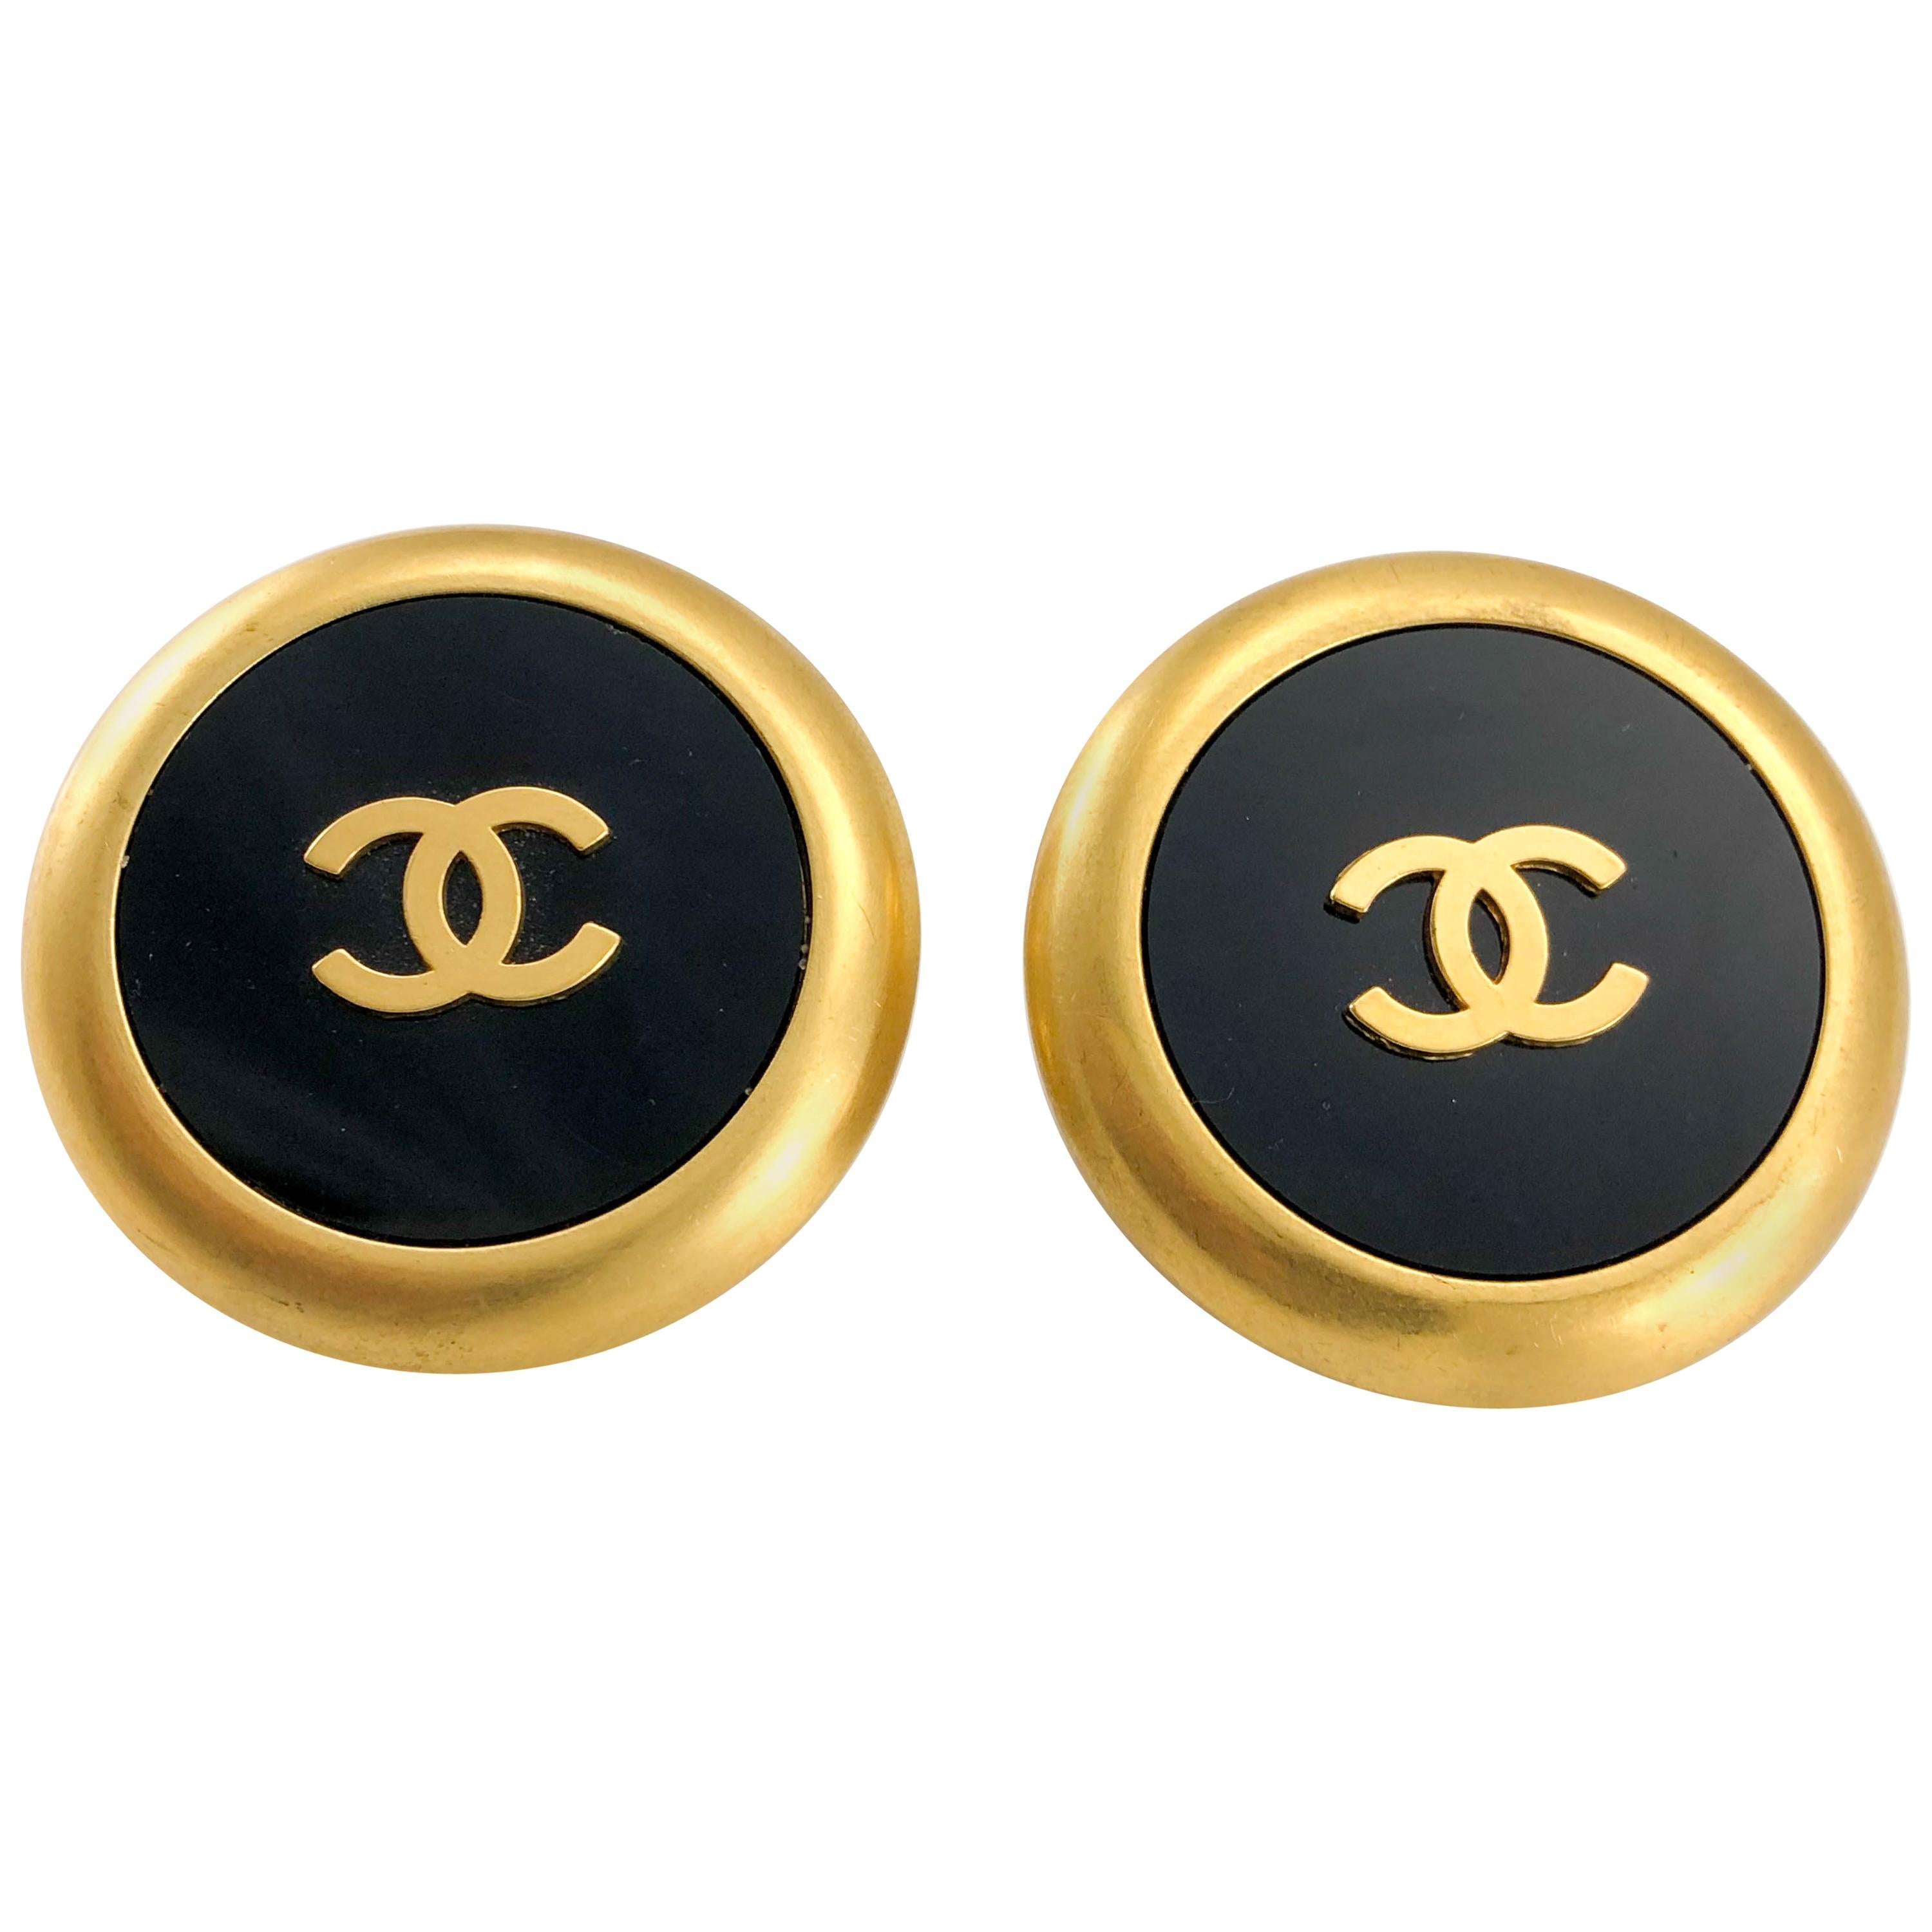 1992 Chanel Large Black And Golden Round Logo Earrings For Sale